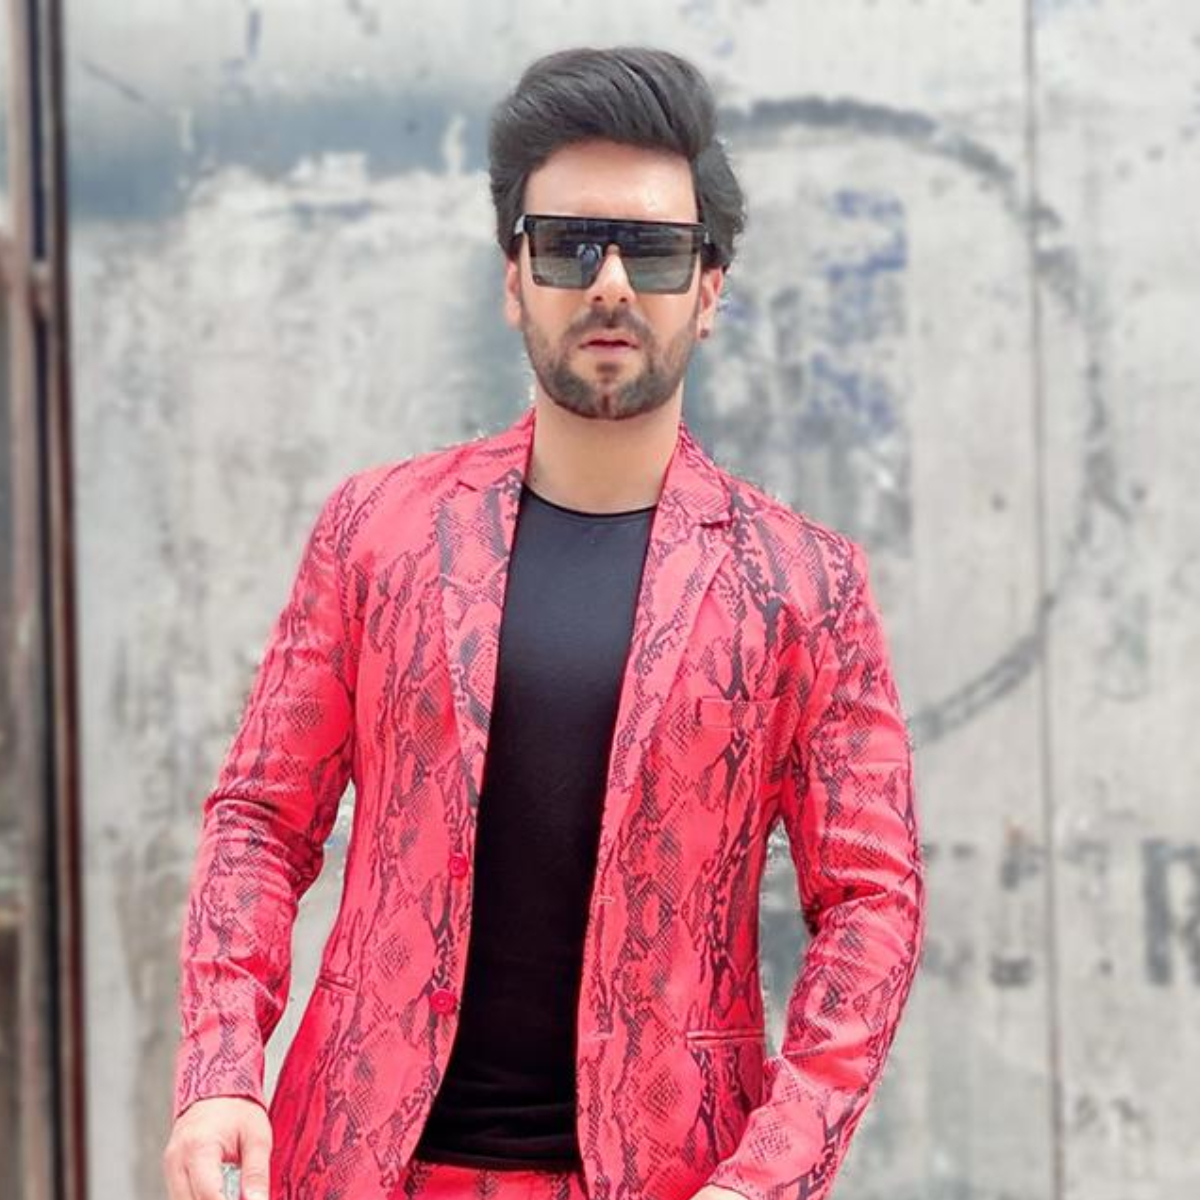 EXCLUSIVE: Kundali Bhagya actor Sanjay Gagnani says he isn’t inclined towards Bigg Boss right now